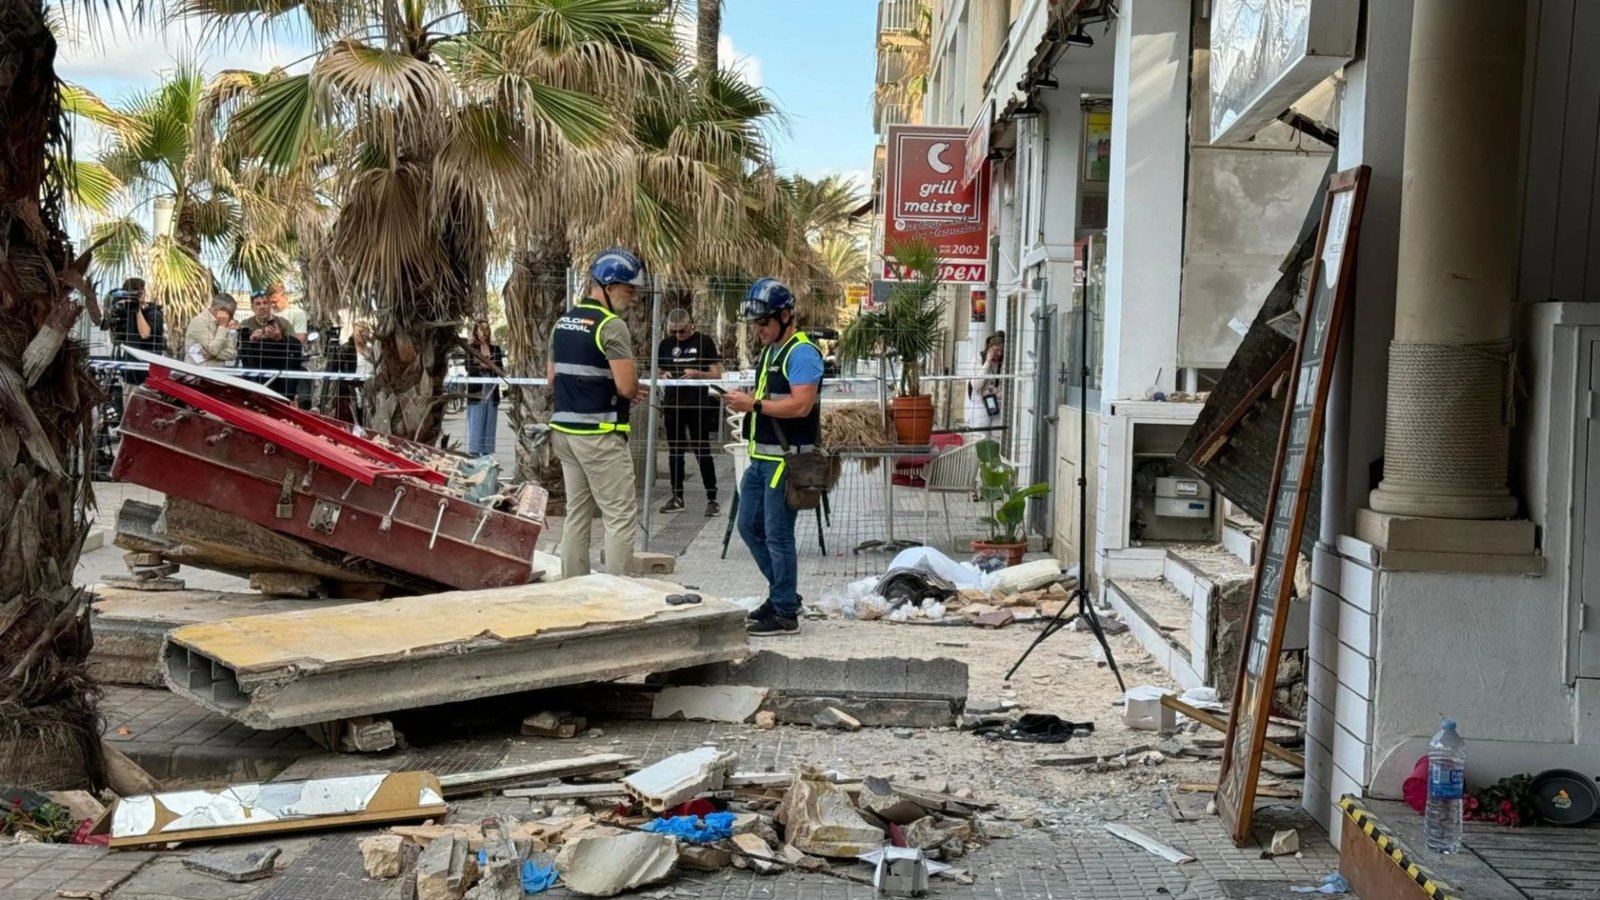 Majorca beach club warning as locals fear deadly Medusa disaster could hit more bars that ‘aren’t designed for tourists’